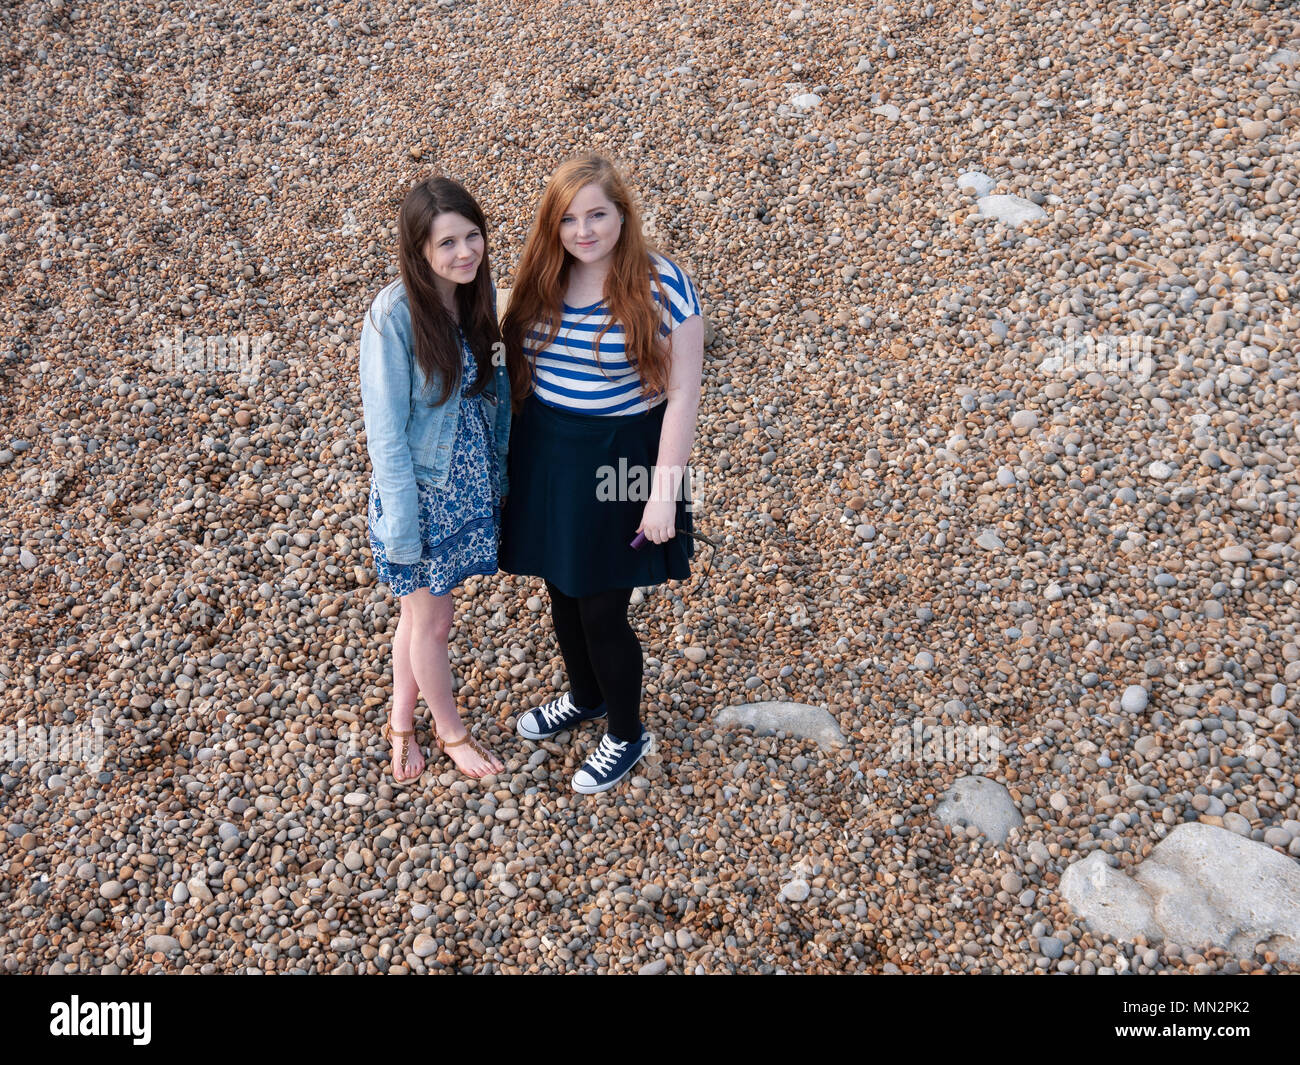 Two young ladies on a pebble beach Stock Photo